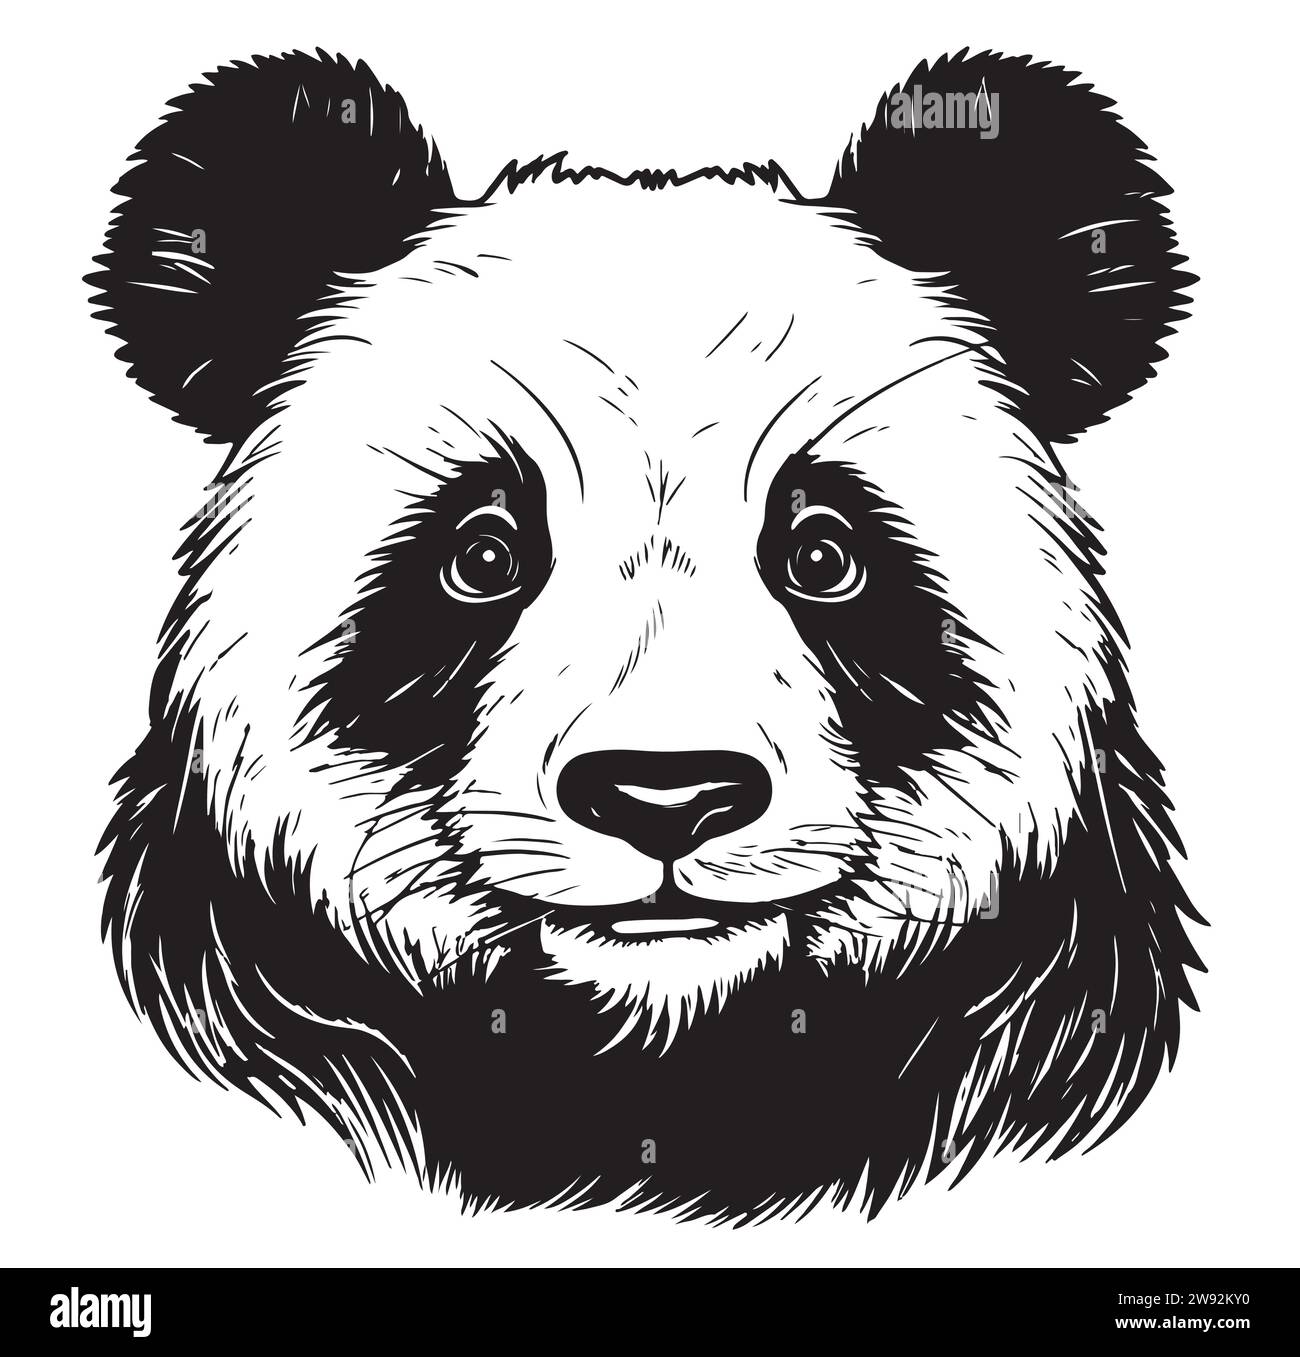 Black and white vector sketch of a Giant Panda face Stock Vector